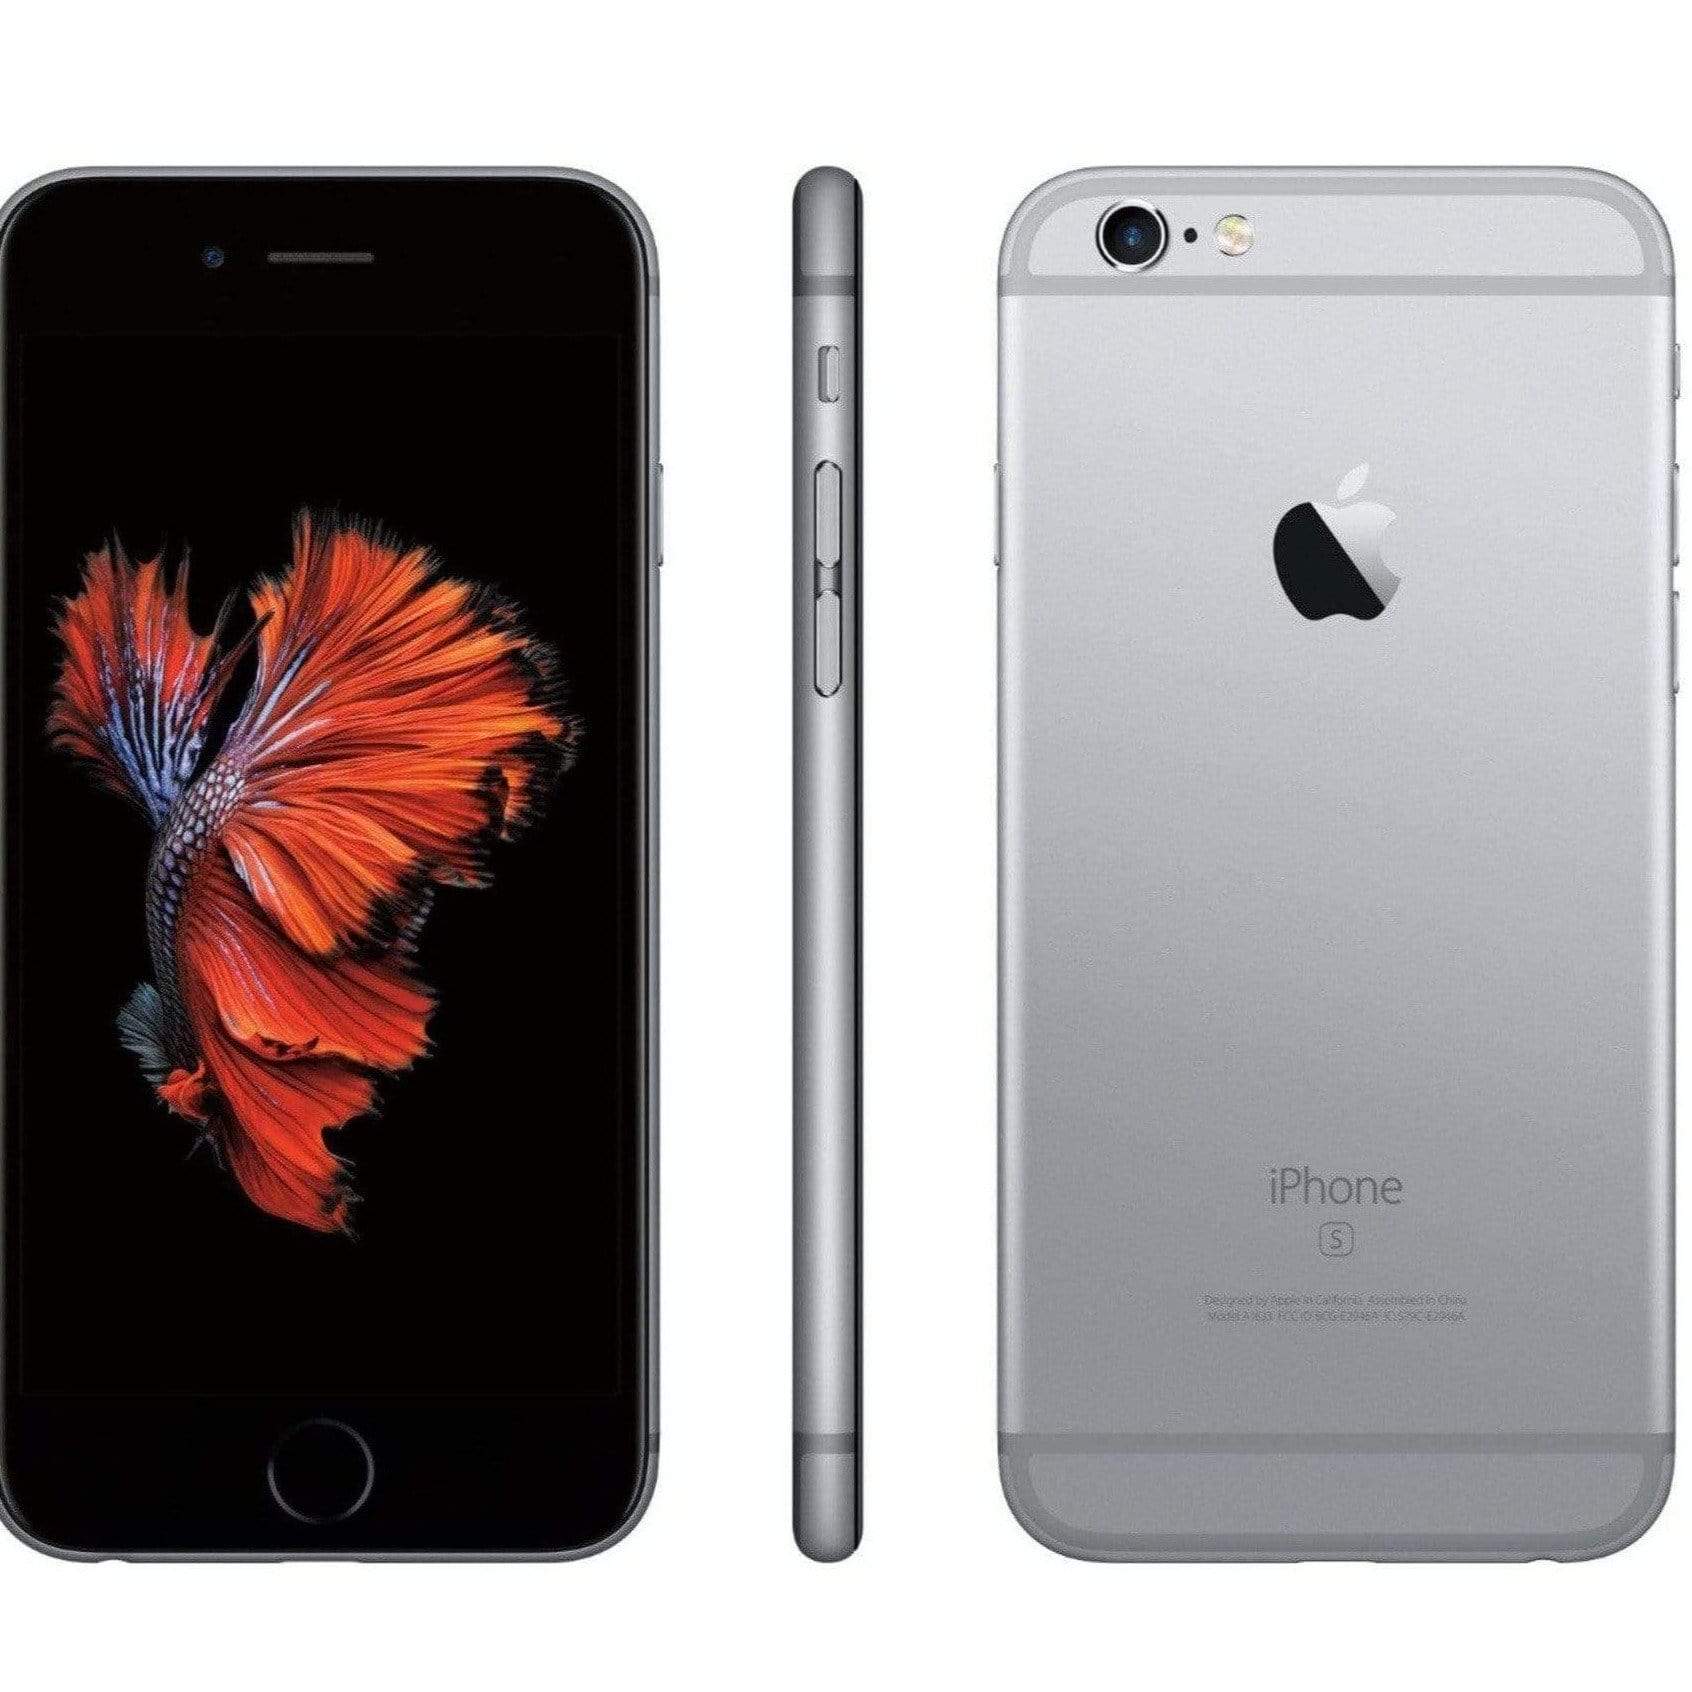 Apple iPhone 6S (Unlocked All Carriers).